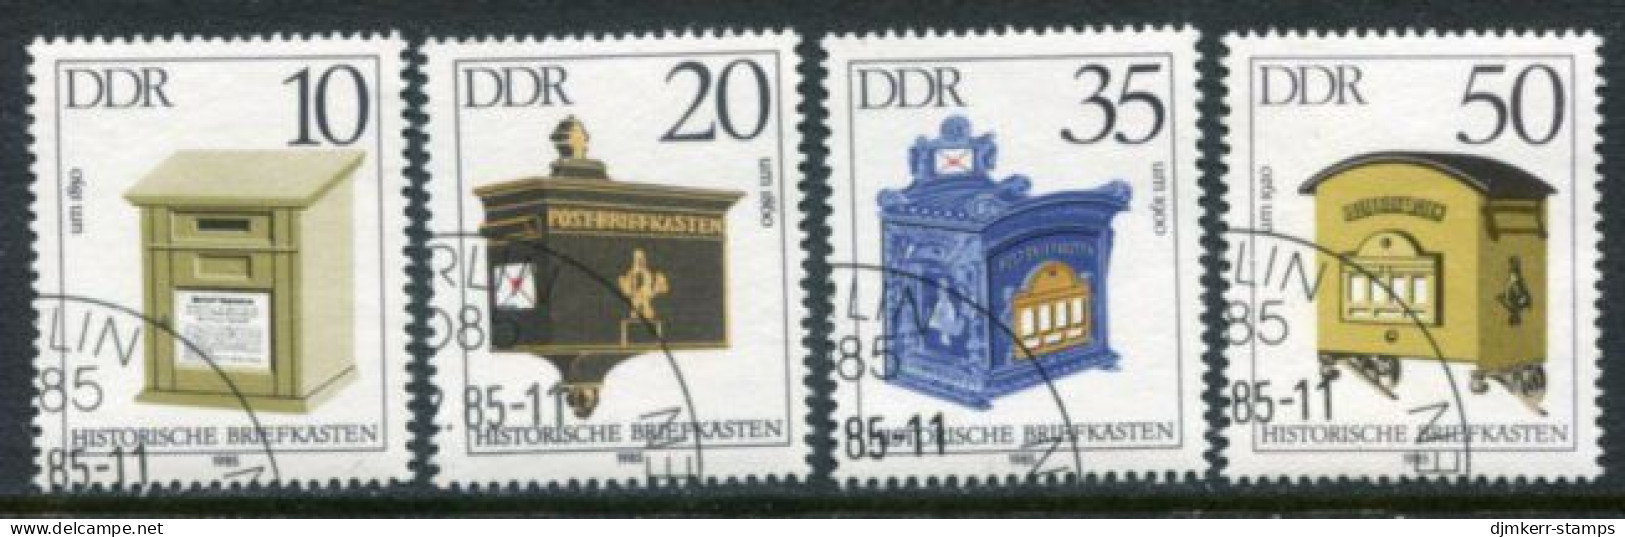 DDR 1985 Histpric Letterboxes Singles Used .  Michel 2924-27 - Usati